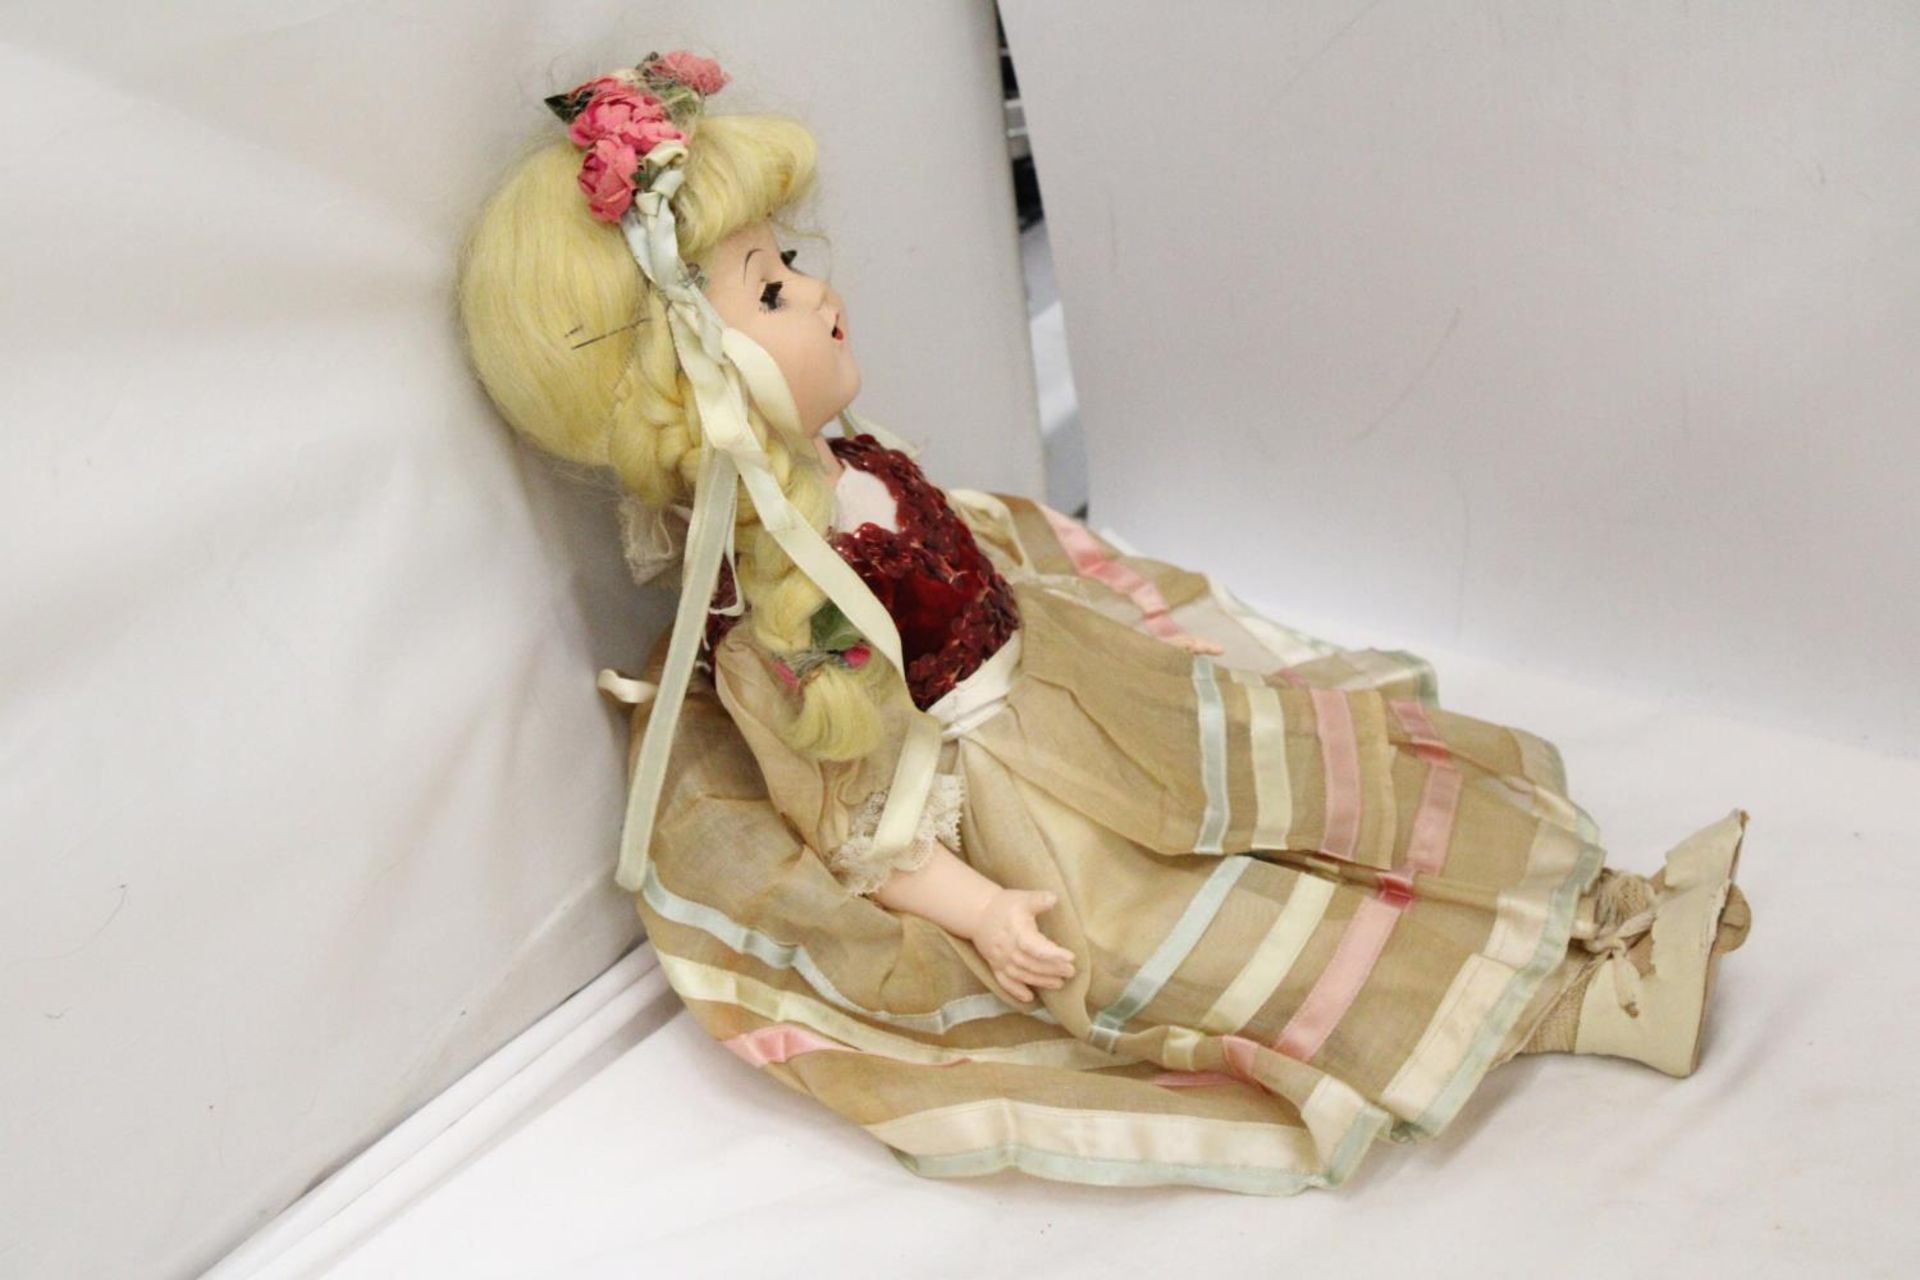 A VINTAGE DOLL WITH ORIGINAL COSTUME AND SLEEPY EYES - Image 2 of 3